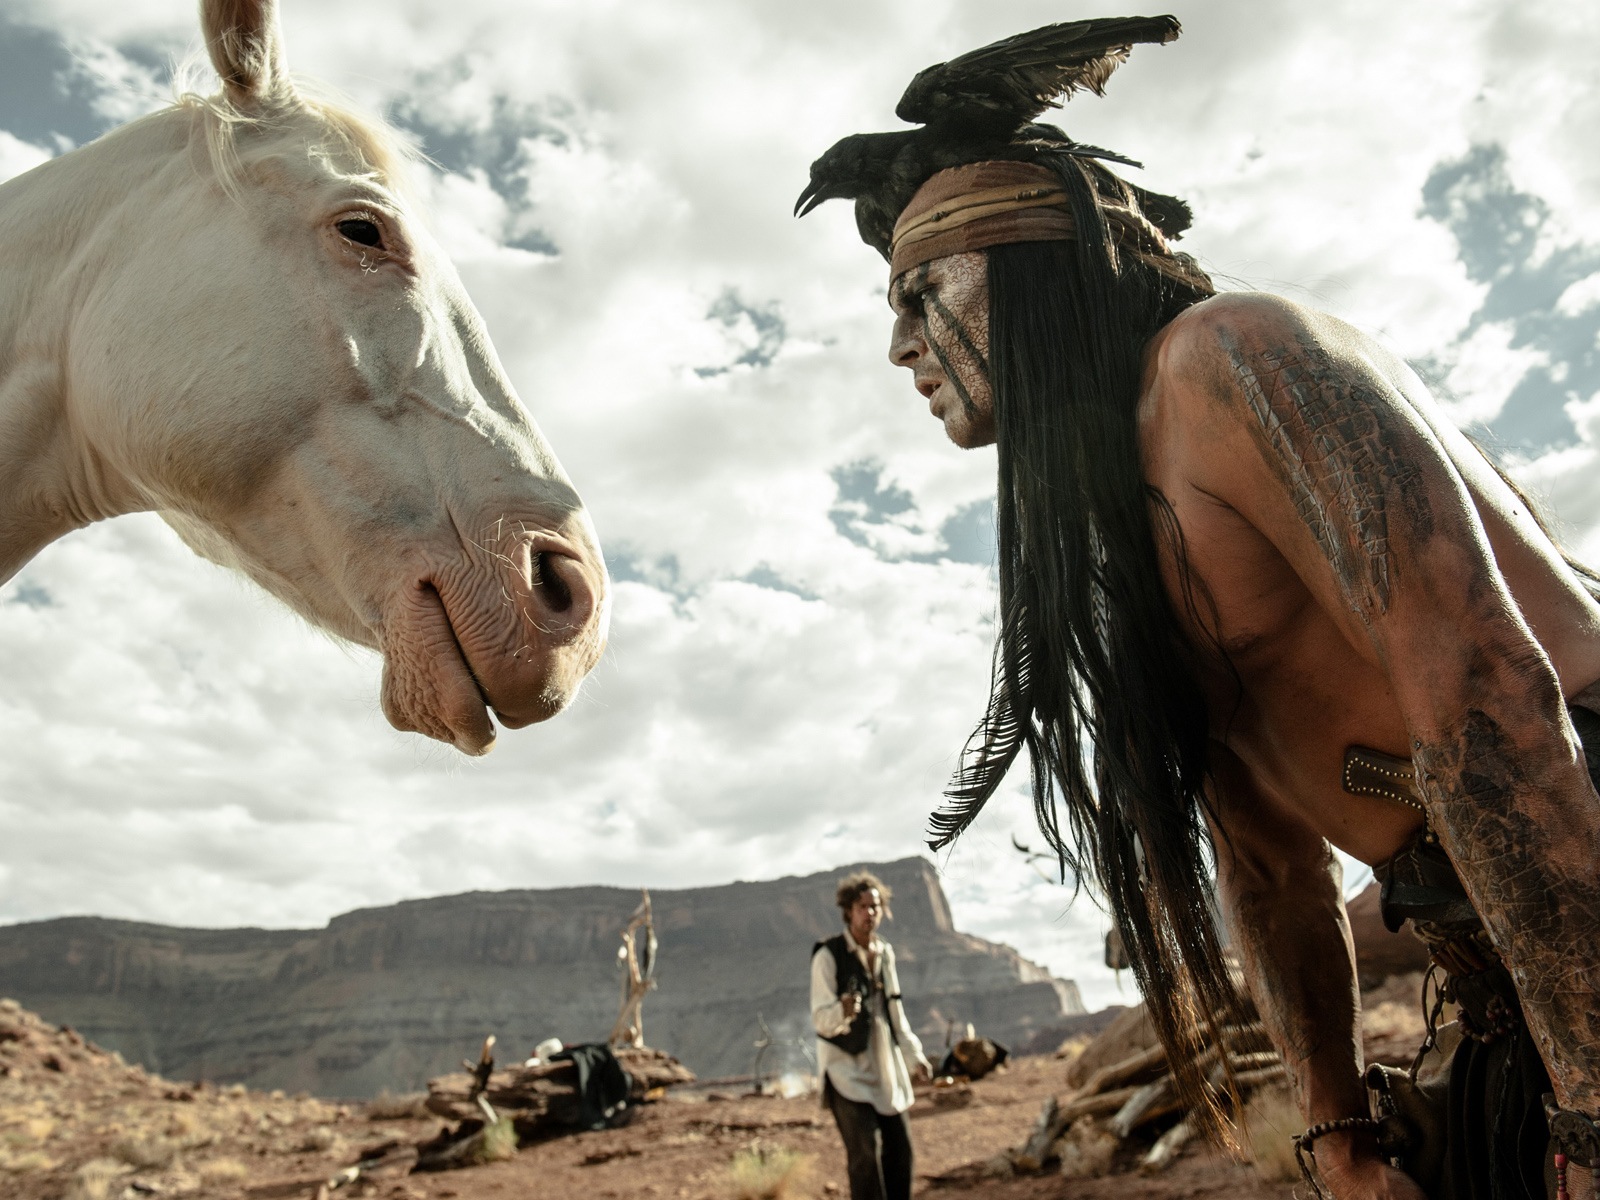 The Lone Ranger HD movie wallpapers #19 - 1600x1200